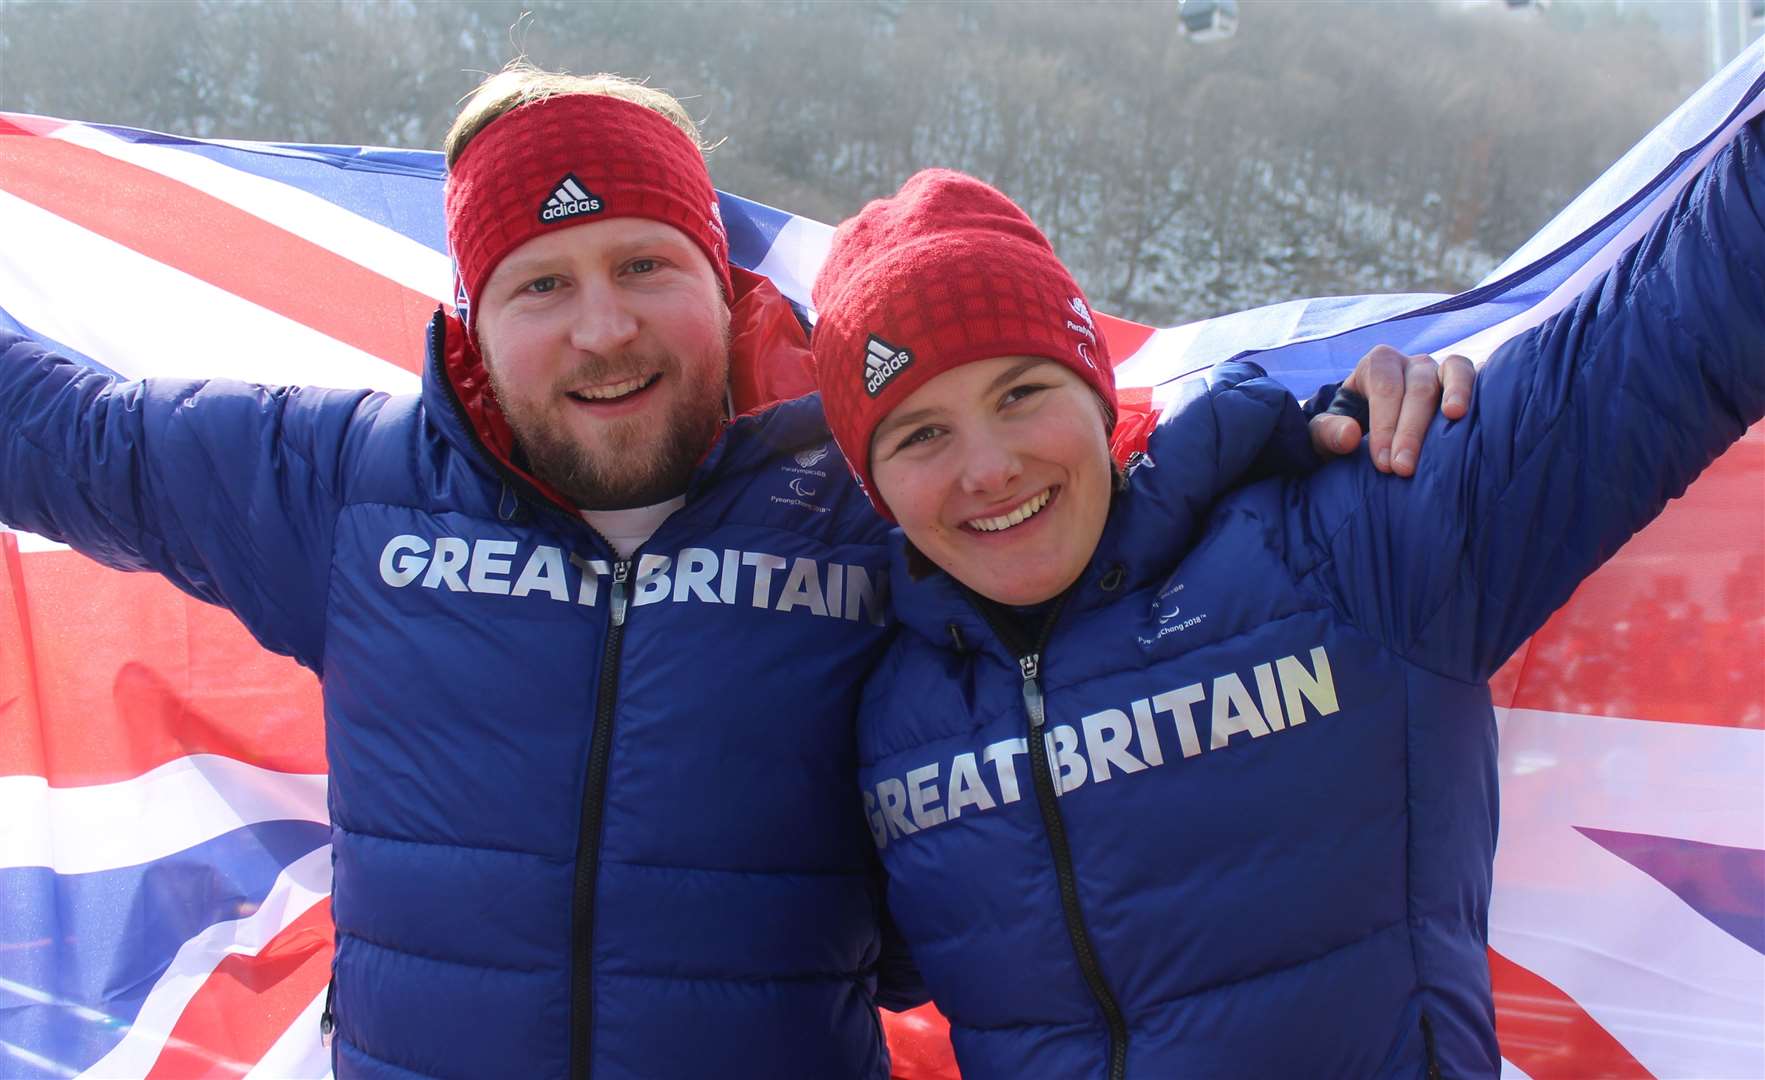 Millie Knight and her guide Brett Wild - have raced together for the final time.